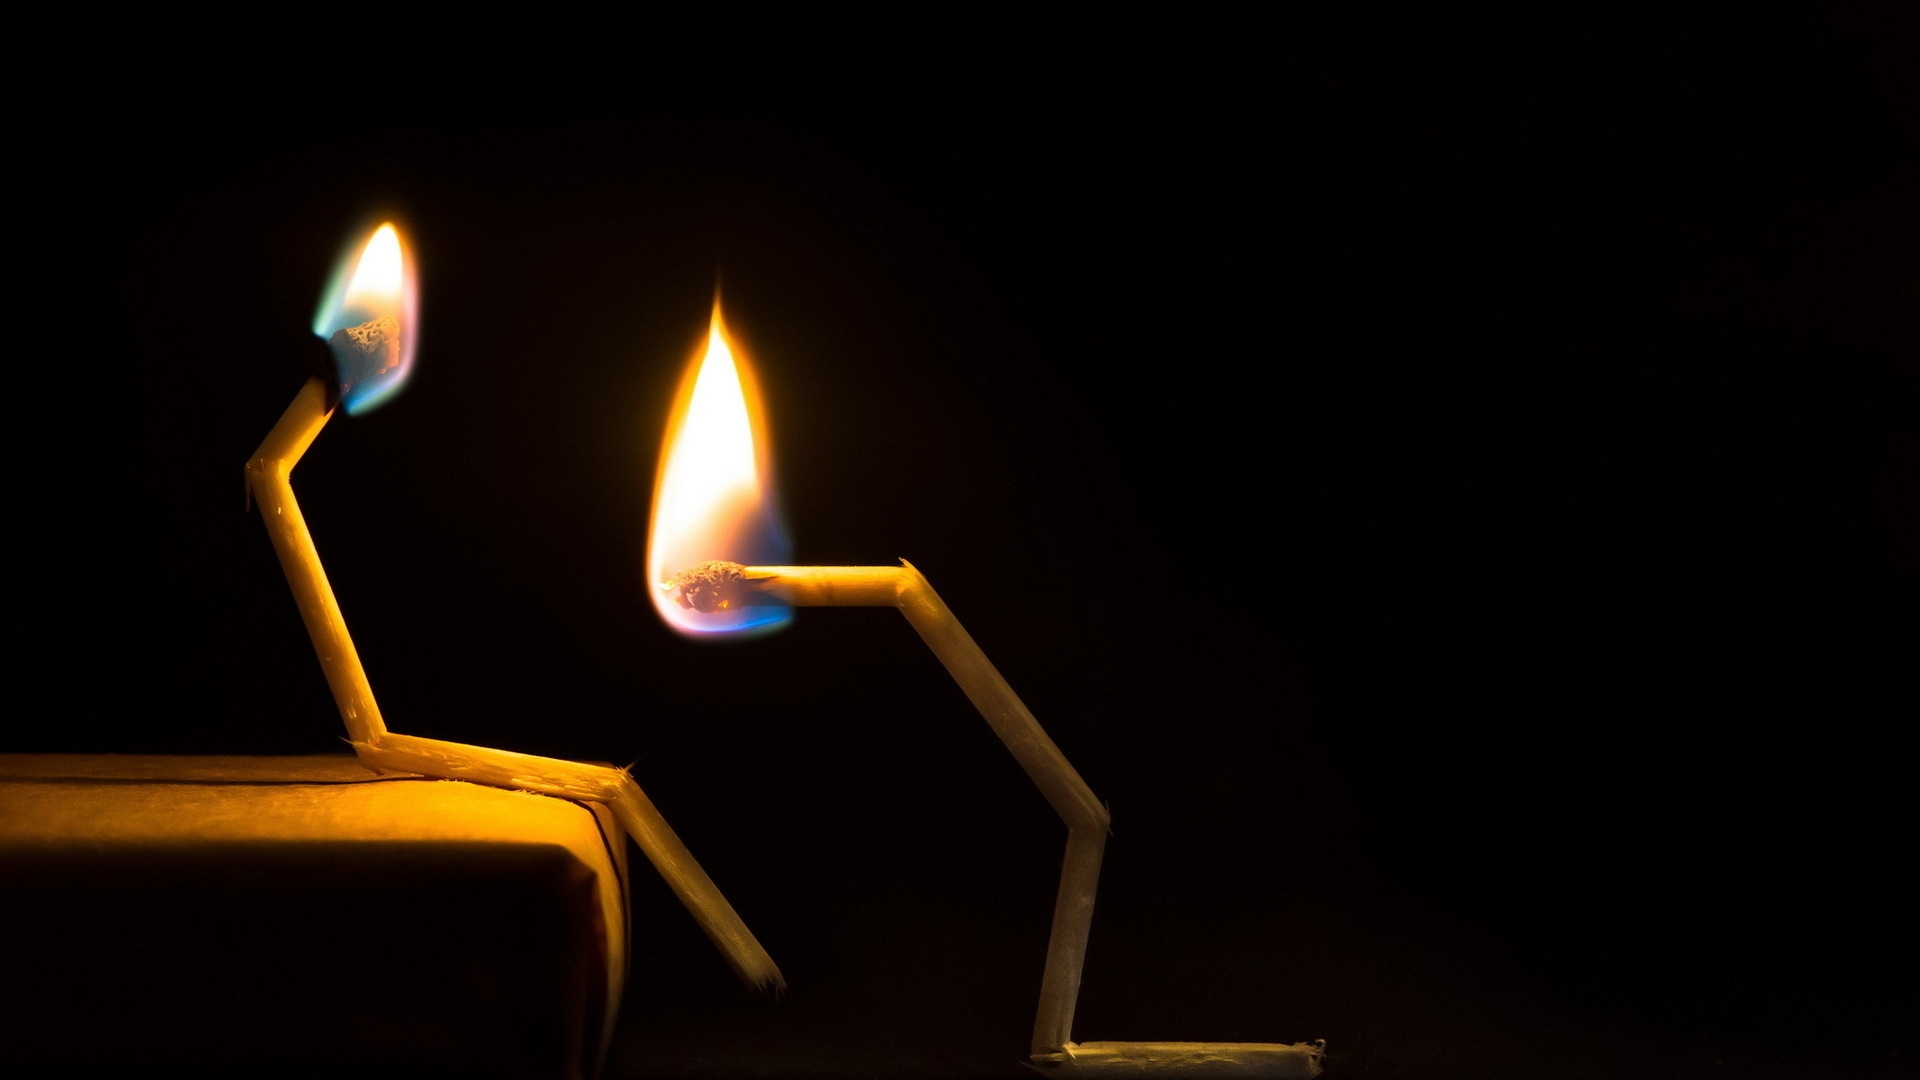 Matchsticks Puzzle for 1920 x 1080 HDTV 1080p resolution